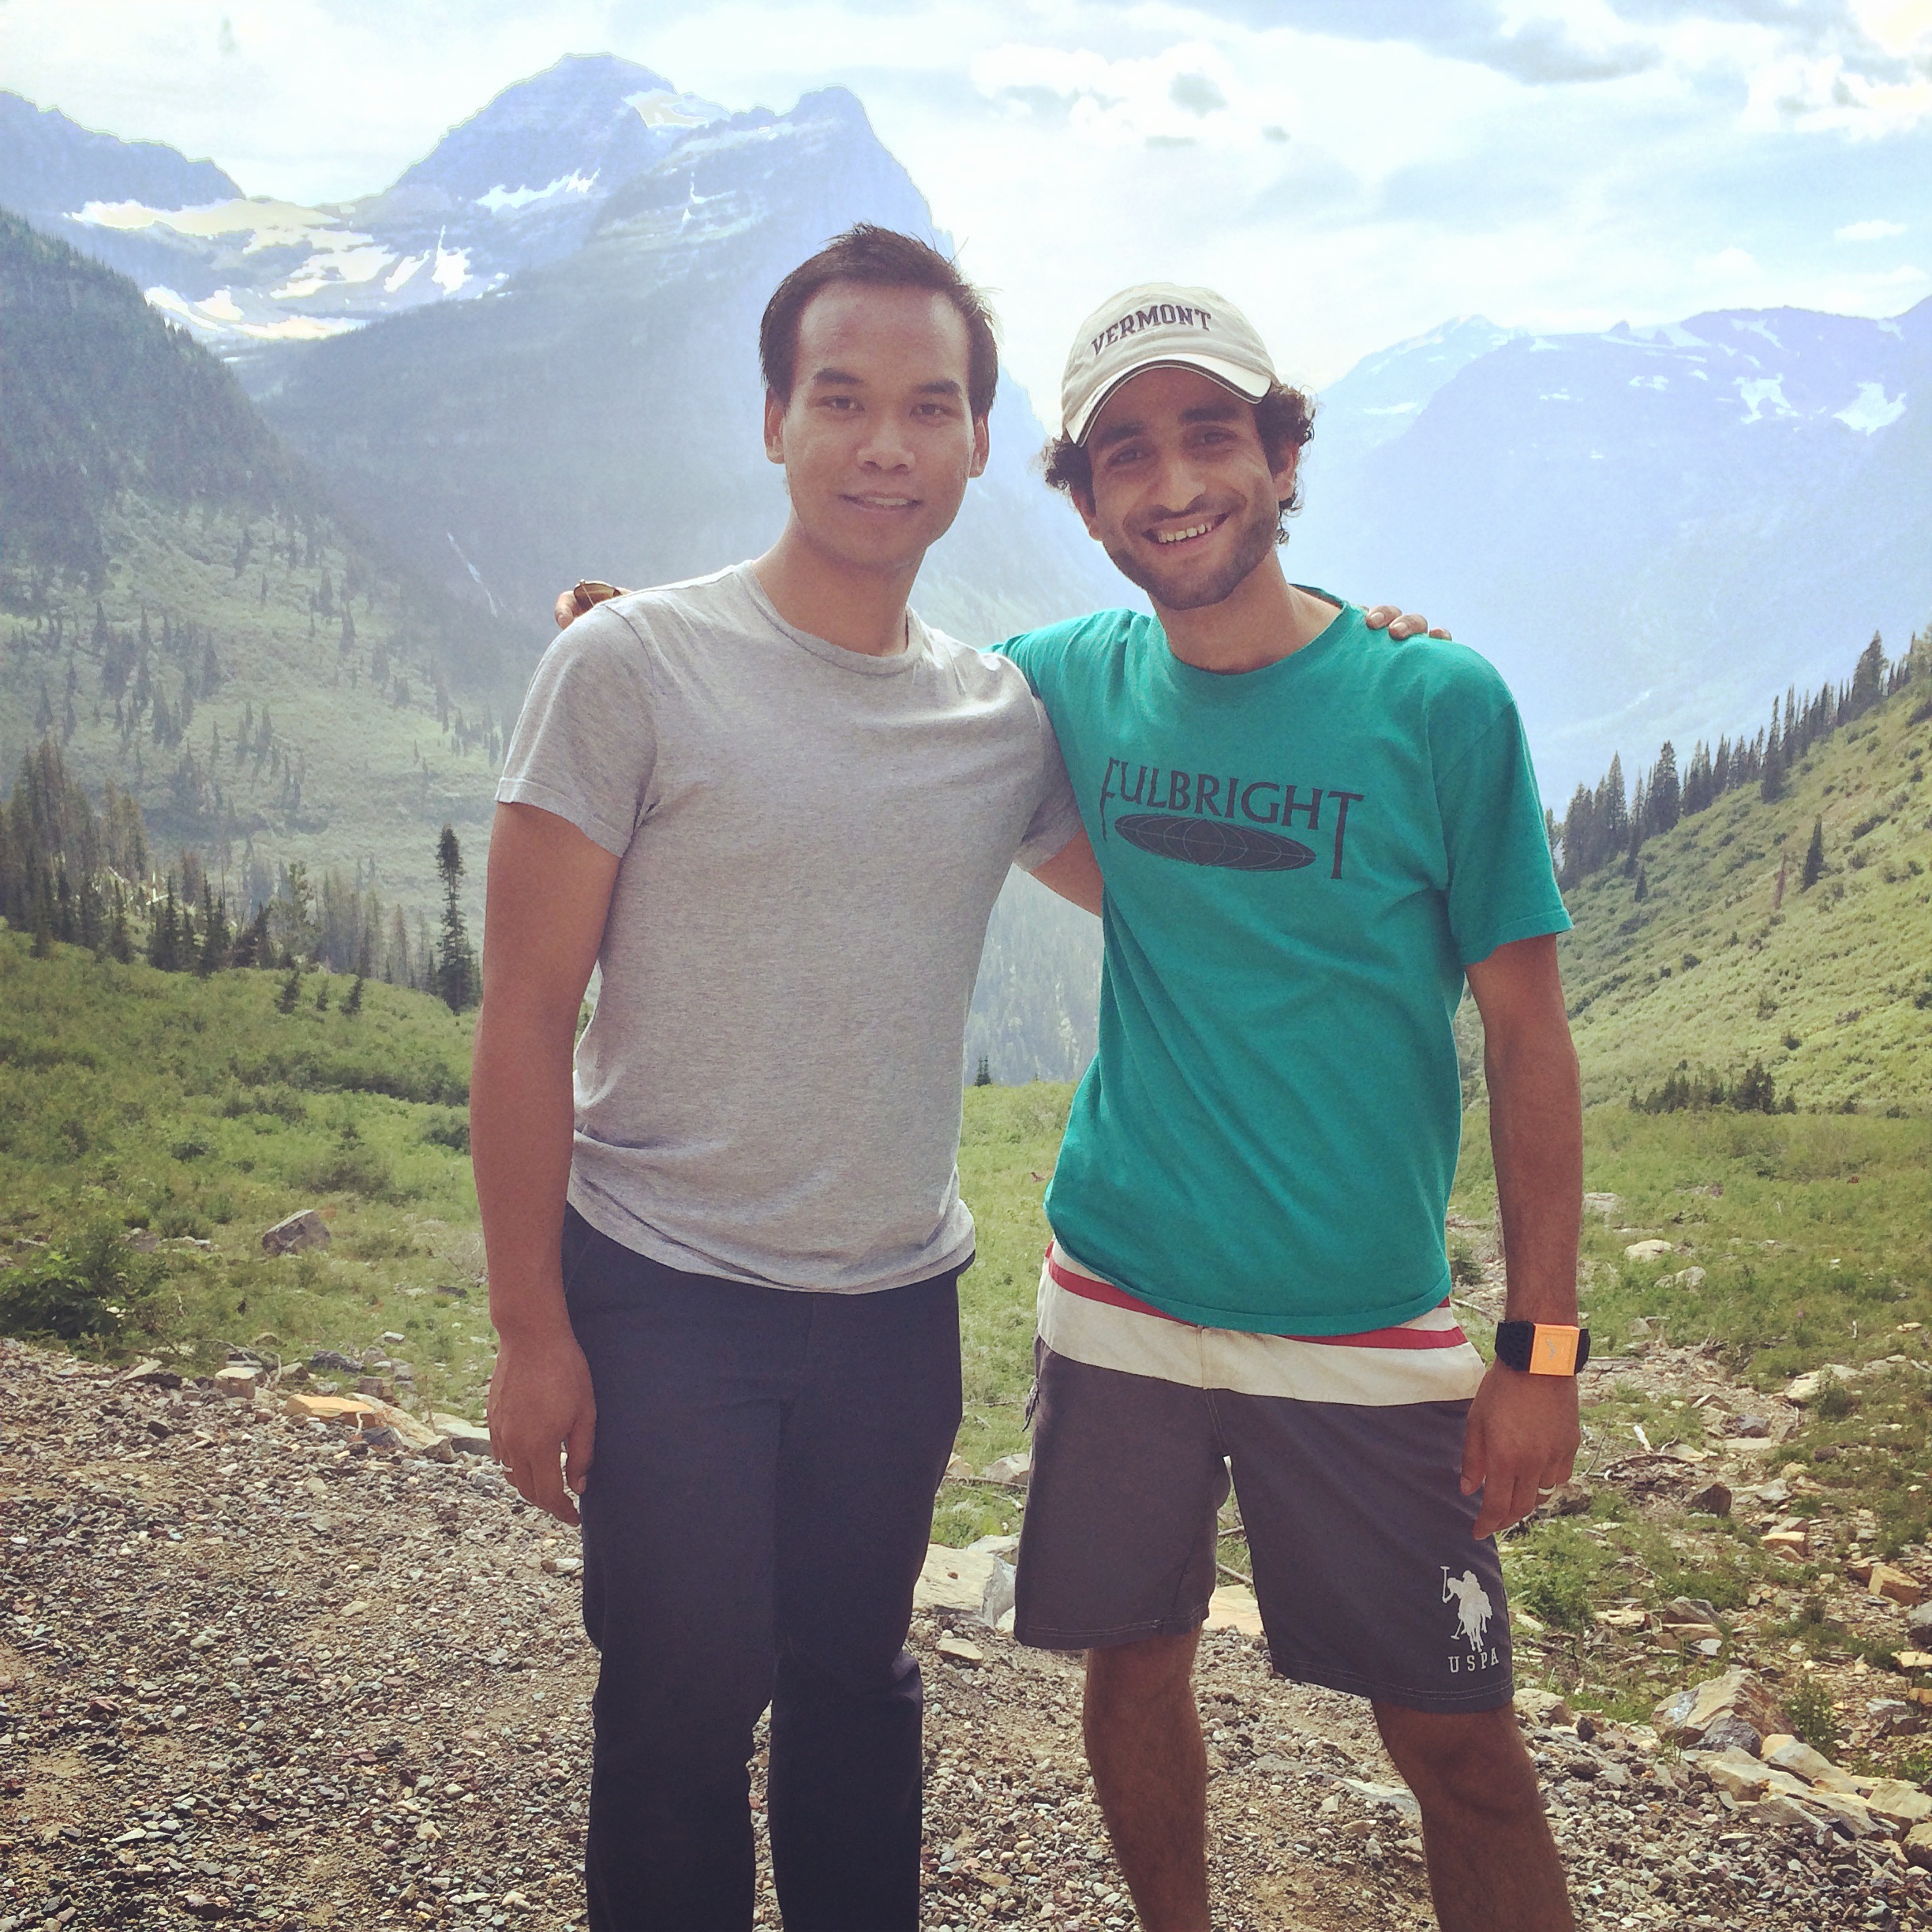 Fulbright Student from Indonesia, Alyas Widita, left, and Fulbright Student from Yemen, Ammar Mohammed, right, in Glacier National Park, Montana.